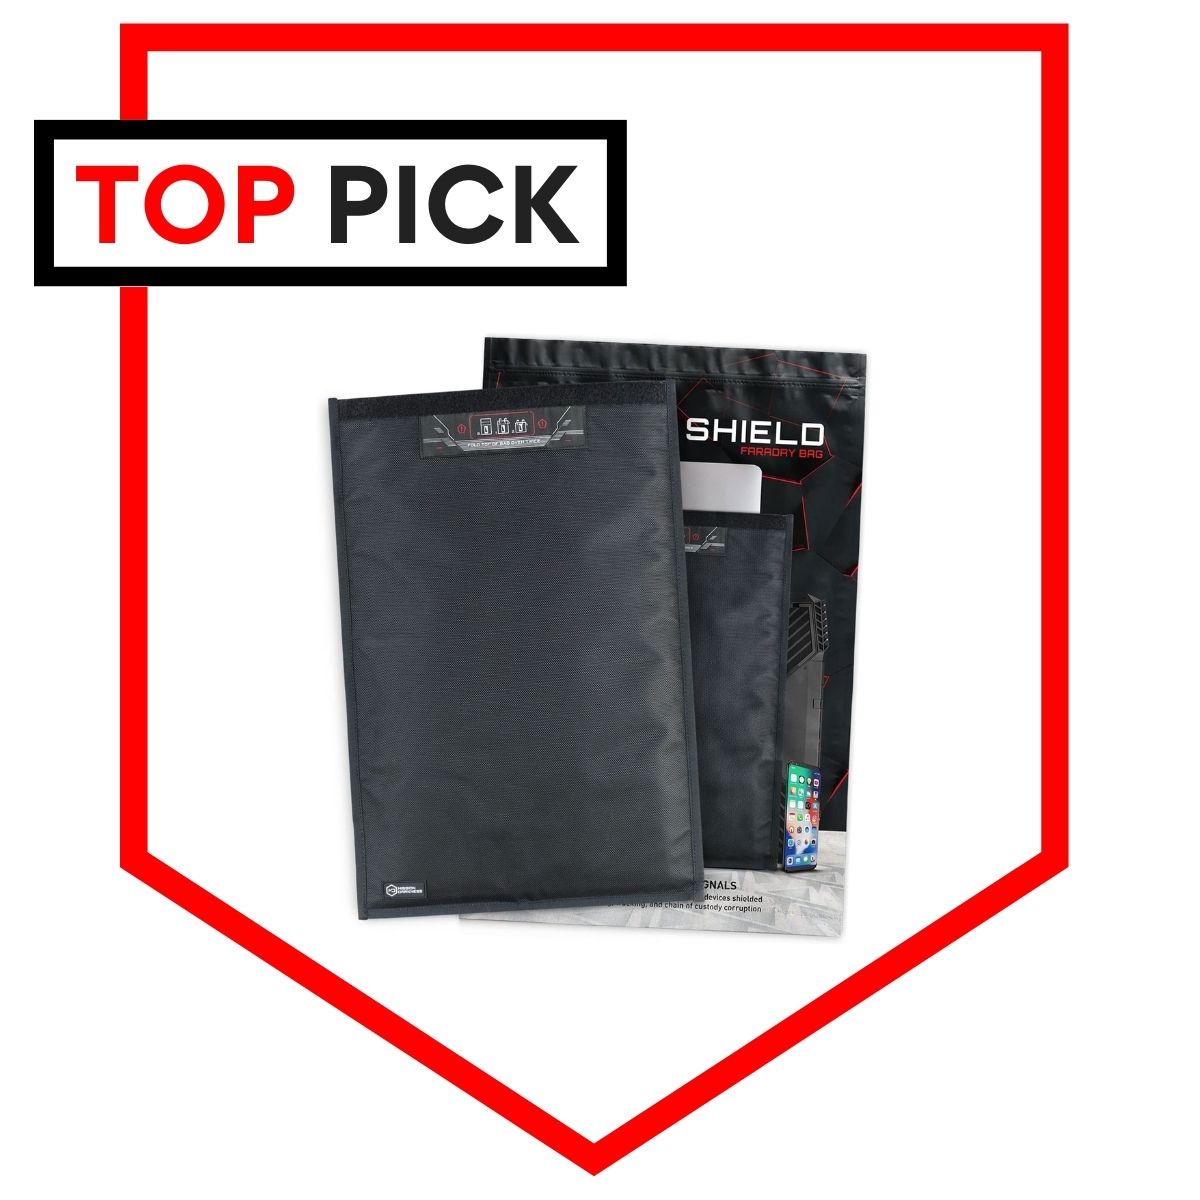 Best Faraday Bag for EMPs and RFID Blocking